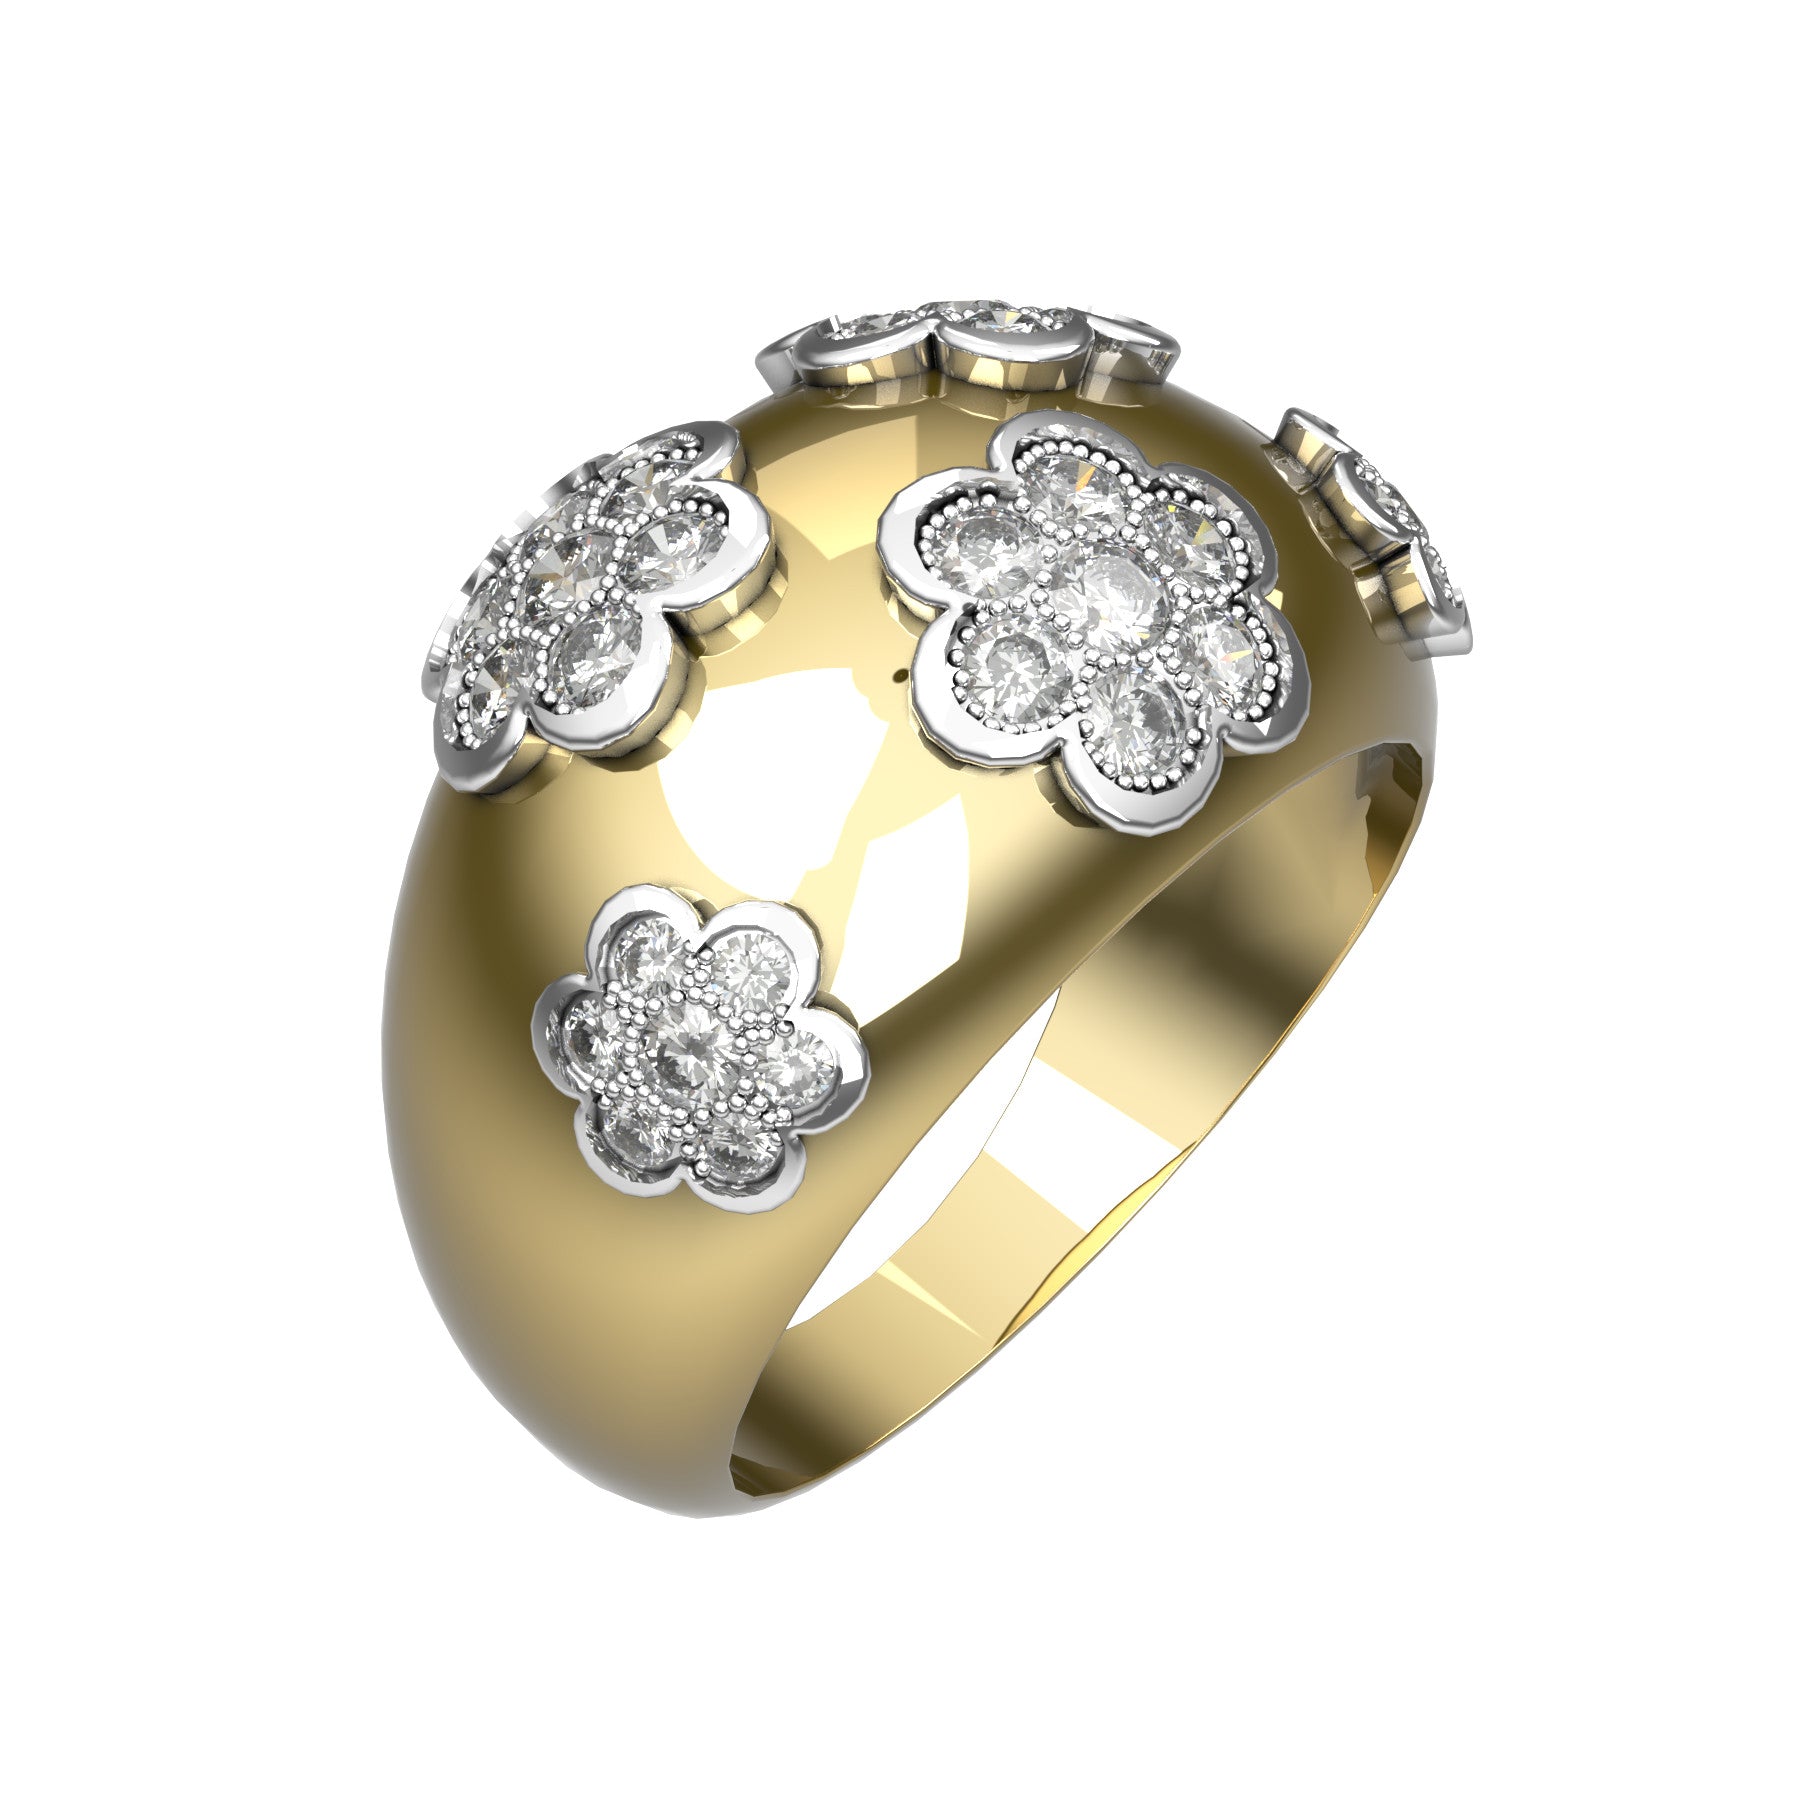 Blooming band ring, natural round diamonds, 18 k yellow and white gold, weight about 7,00 g (0.25 oz), width 12 mm max